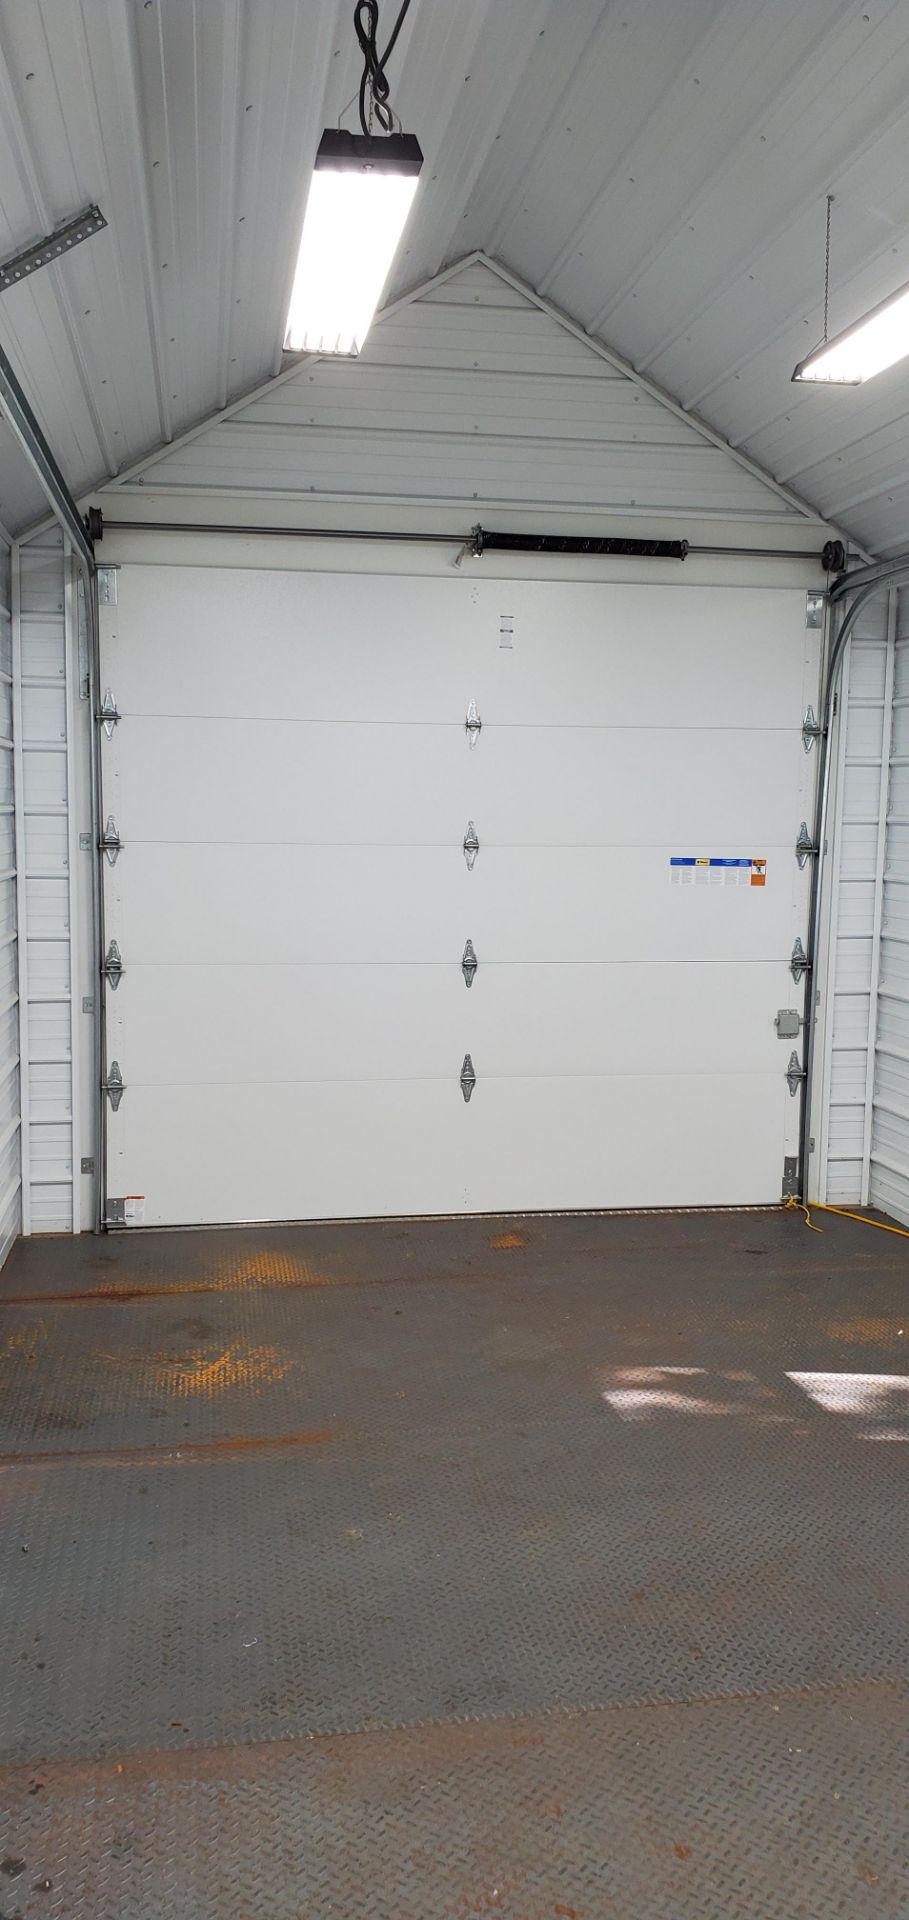 Yoder Portable 12’ x 24’ x 13' 4" High Garage Building, Full 8’ Walls, Like New, Fully Insulated, - Image 6 of 8